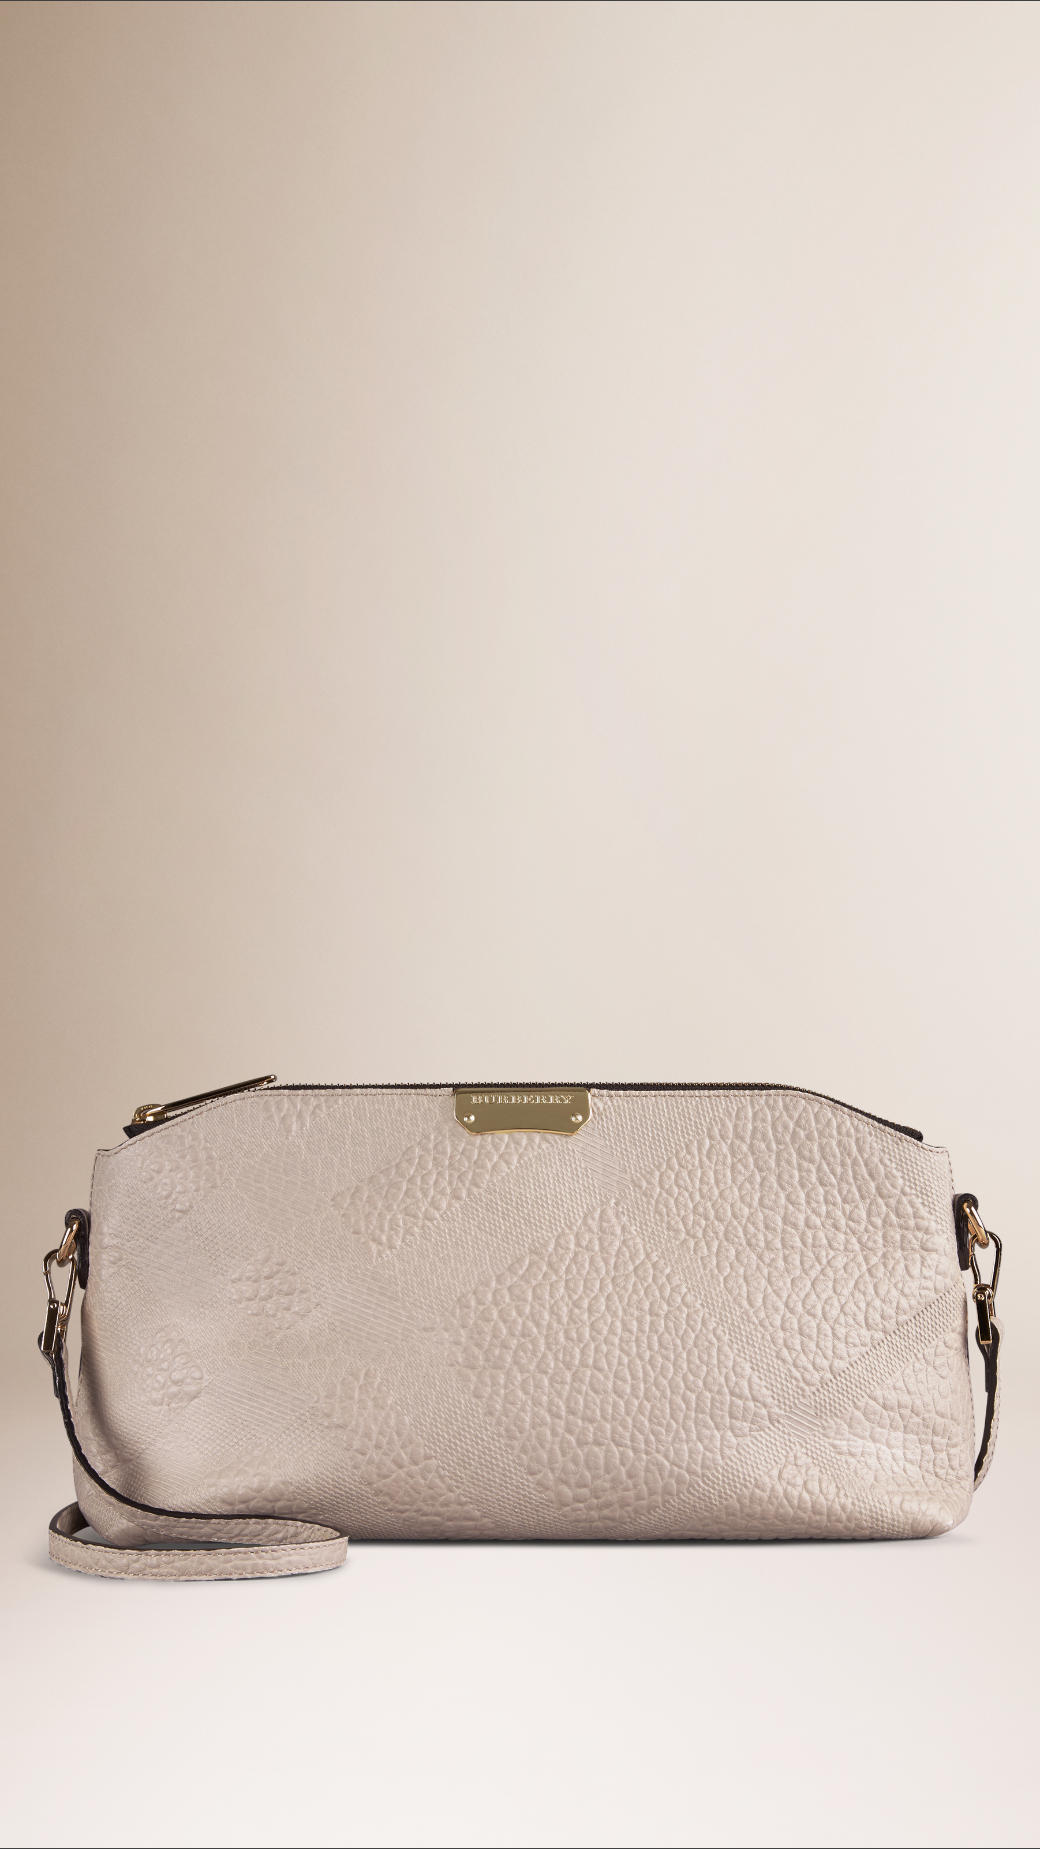 Burberry Small Embossed Check Leather Clutch Bag in White (stone white ...